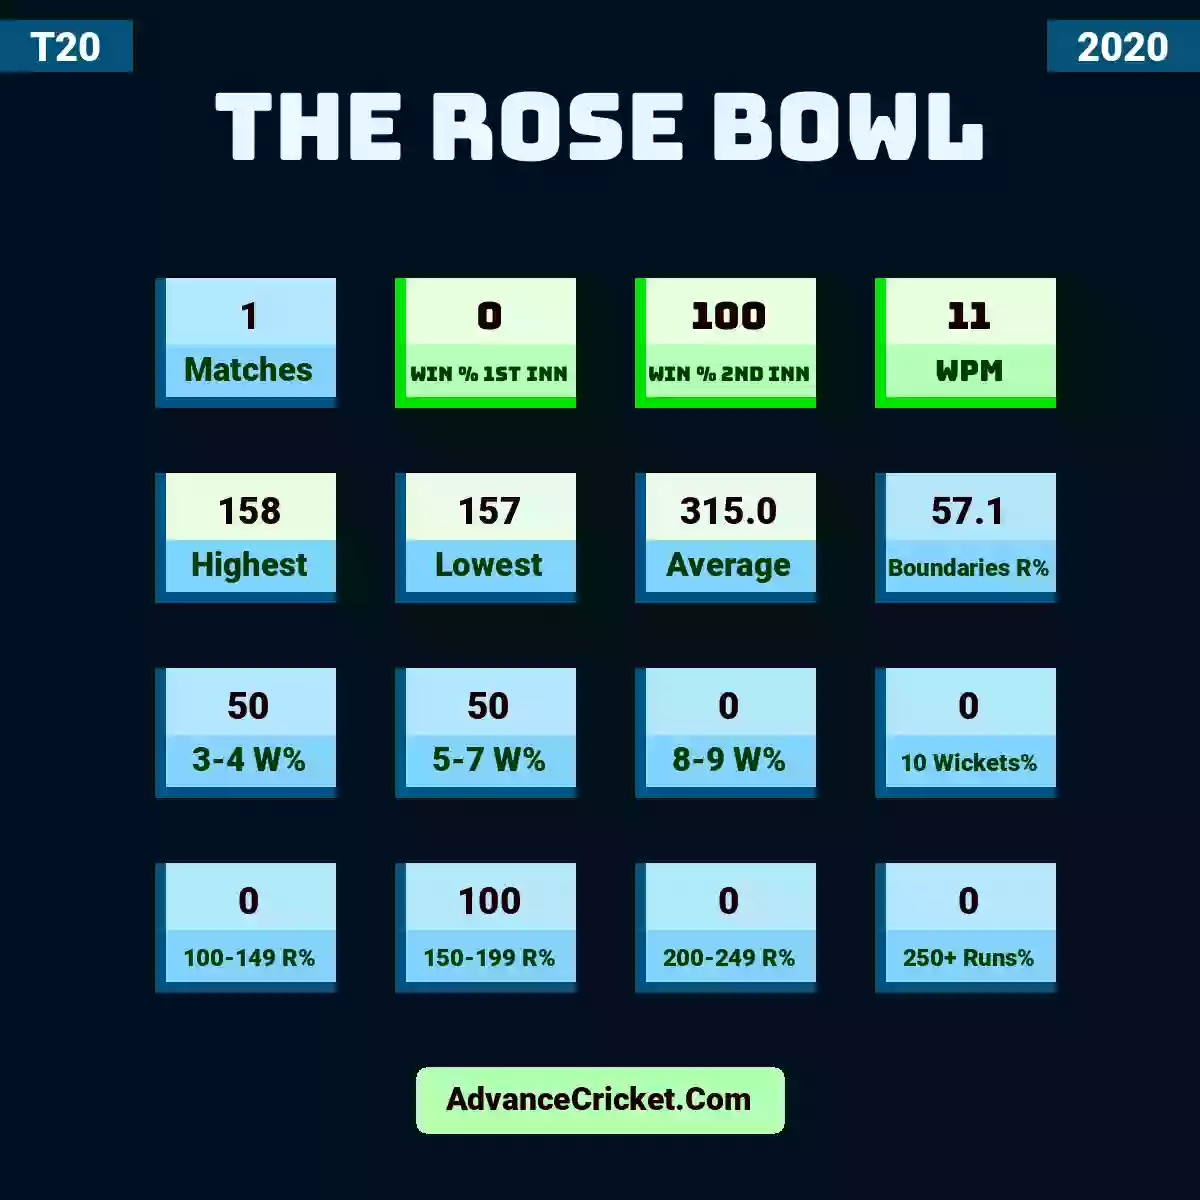 Image showing The Rose Bowl with Matches: 1, Win % 1st Inn: 0, Win % 2nd Inn: 100, WPM: 11, Highest: 158, Lowest: 157, Average: 315.0, Boundaries R%: 57.1, 3-4 W%: 50, 5-7 W%: 50, 8-9 W%: 0, 10 Wickets%: 0, 100-149 R%: 0, 150-199 R%: 100, 200-249 R%: 0, 250+ Runs%: 0.